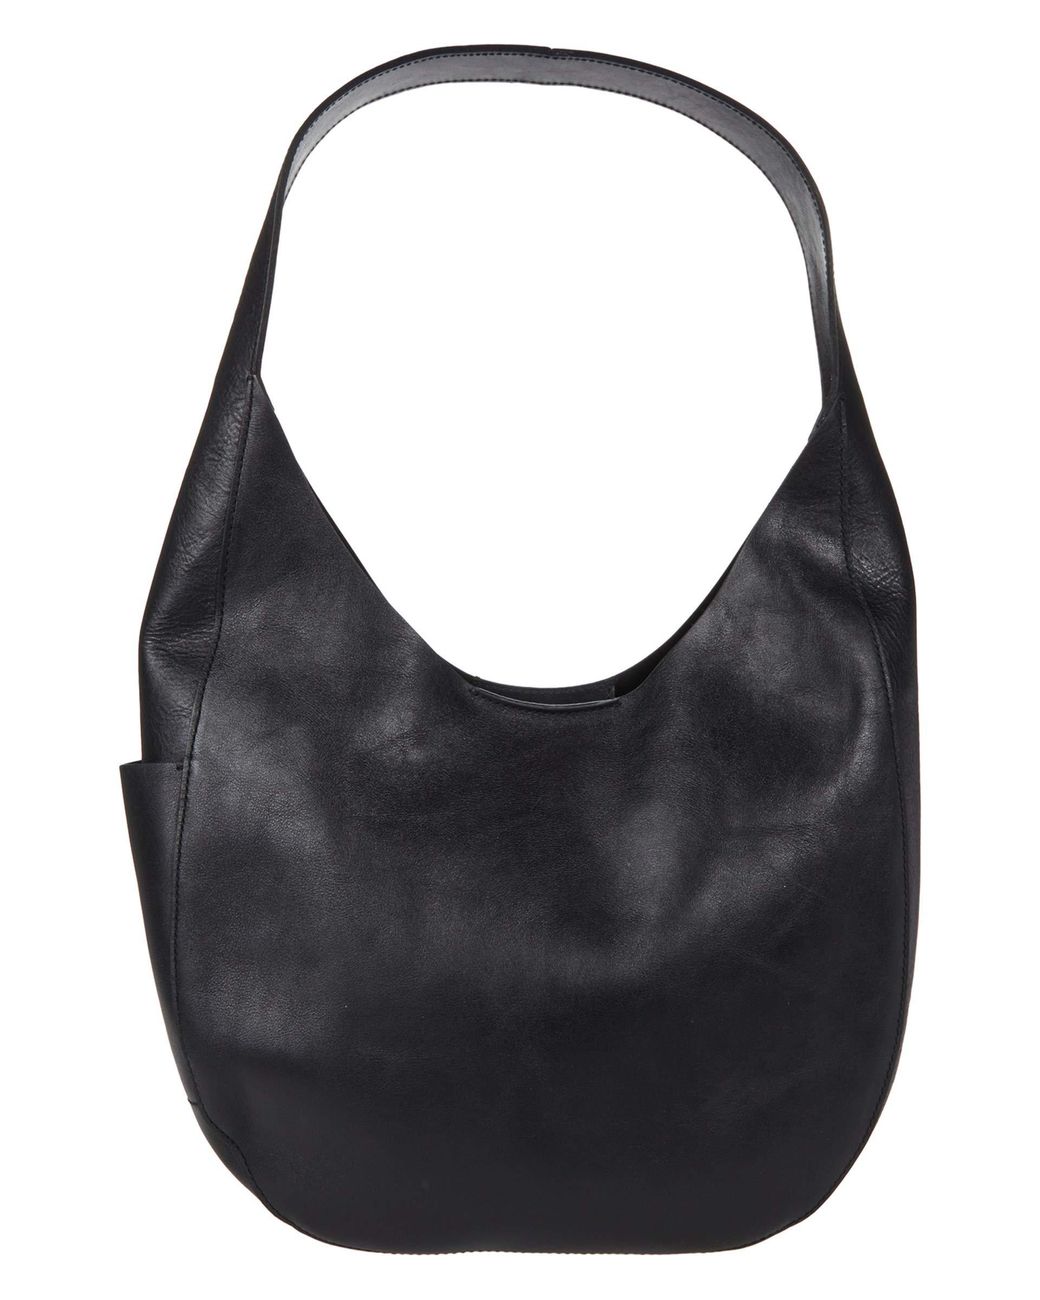 Madewell Leather Oversized Shopper in Black - Lyst